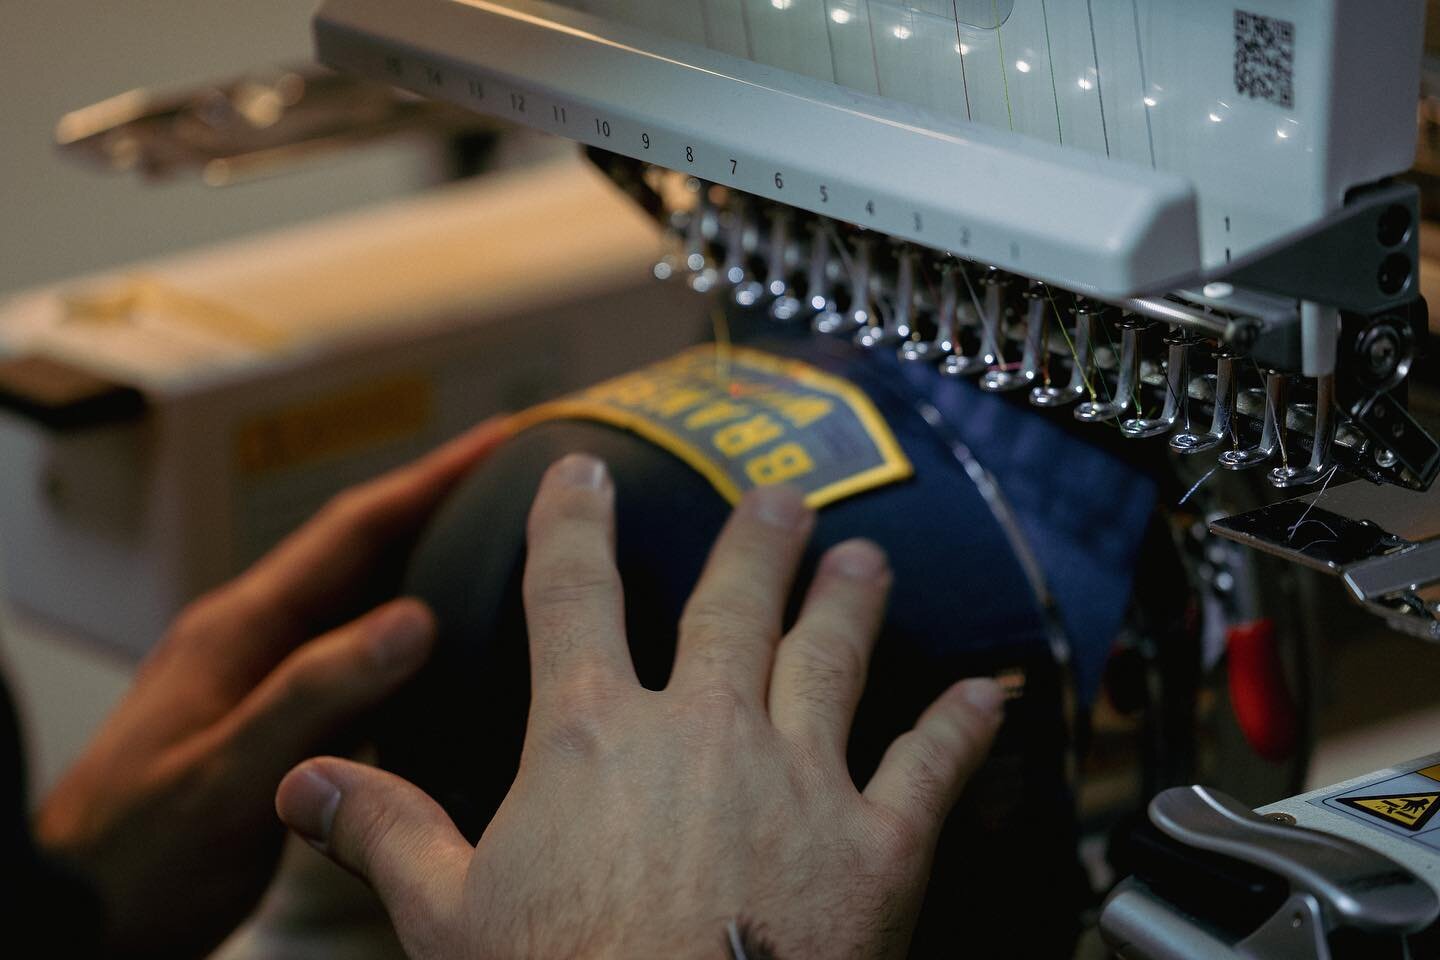 Our top notch attention to detail doesn&rsquo;t stop with our screen printing! From custom embroidery to embroidered patches, we&rsquo;re ready to help you with your next project! 💪🏻